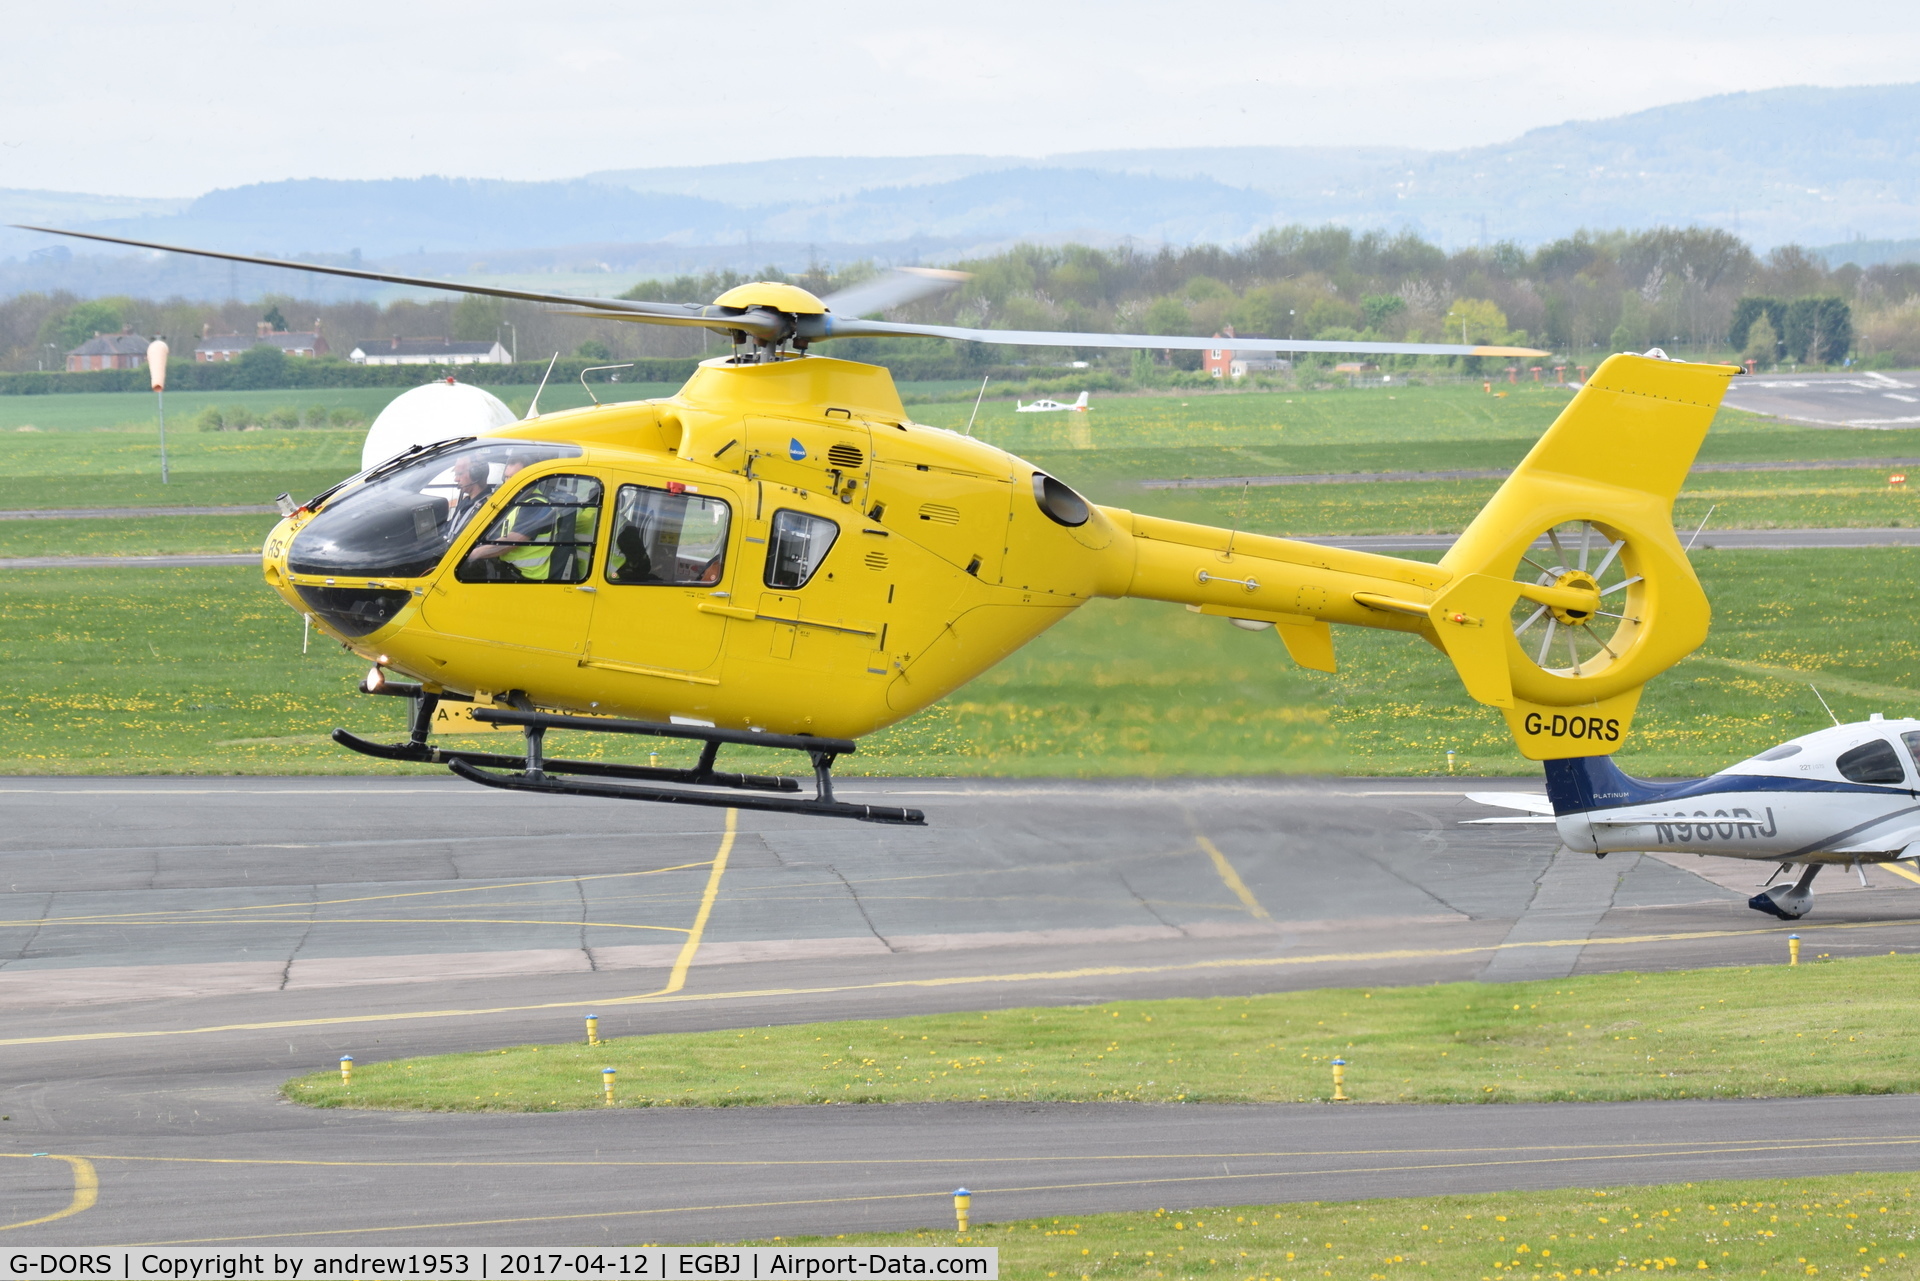 G-DORS, 2006 Eurocopter EC-135T-2+ C/N 0517, G-DORS at Gloucestershire Airport.